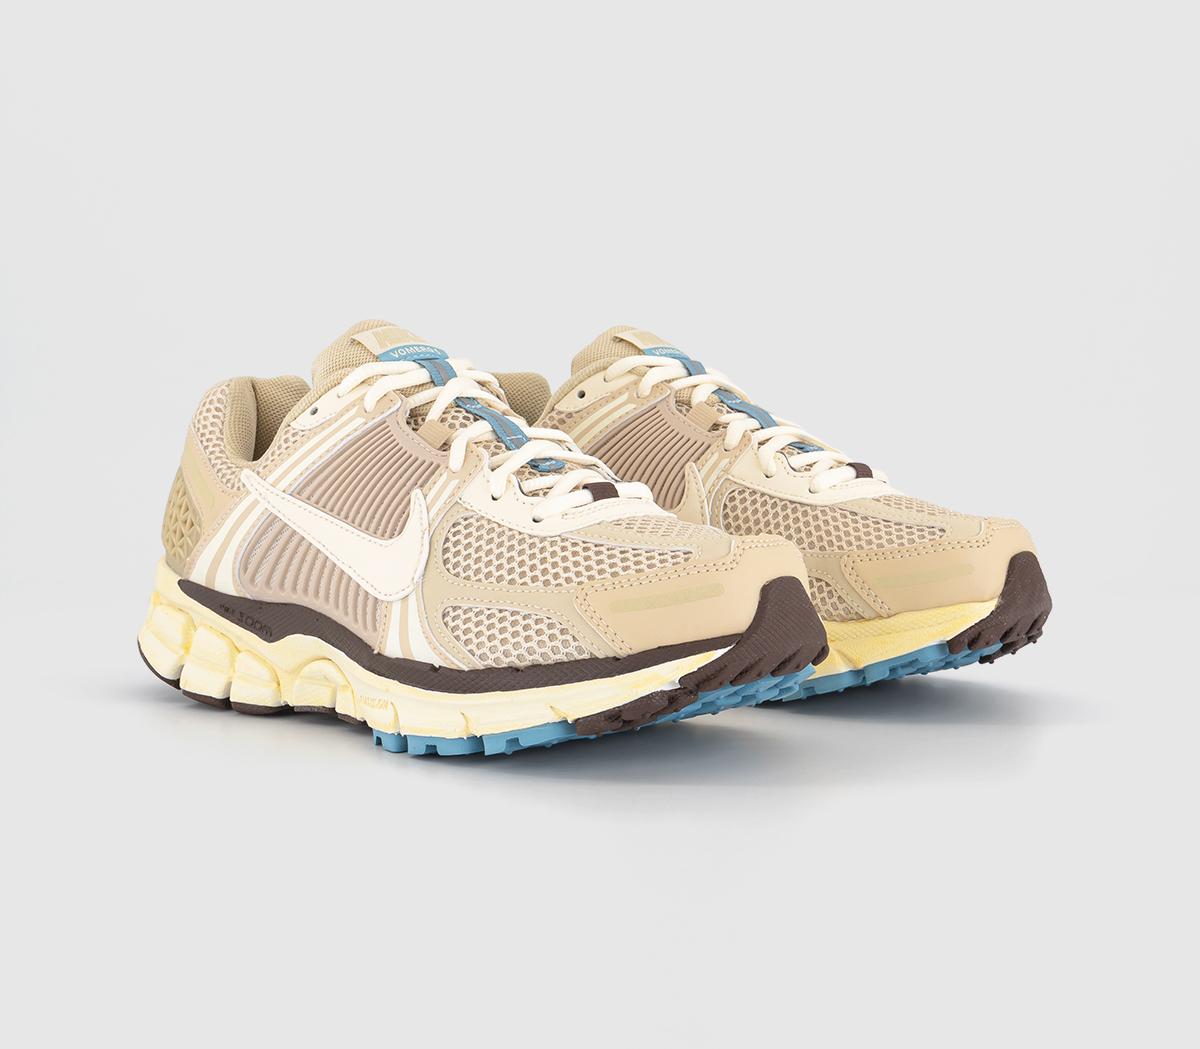 Nike Womens Zoom Vomero 5 Trainers Oatmeal Pale Ivory Sail Light Chocolate Worn Blue Natural, 3